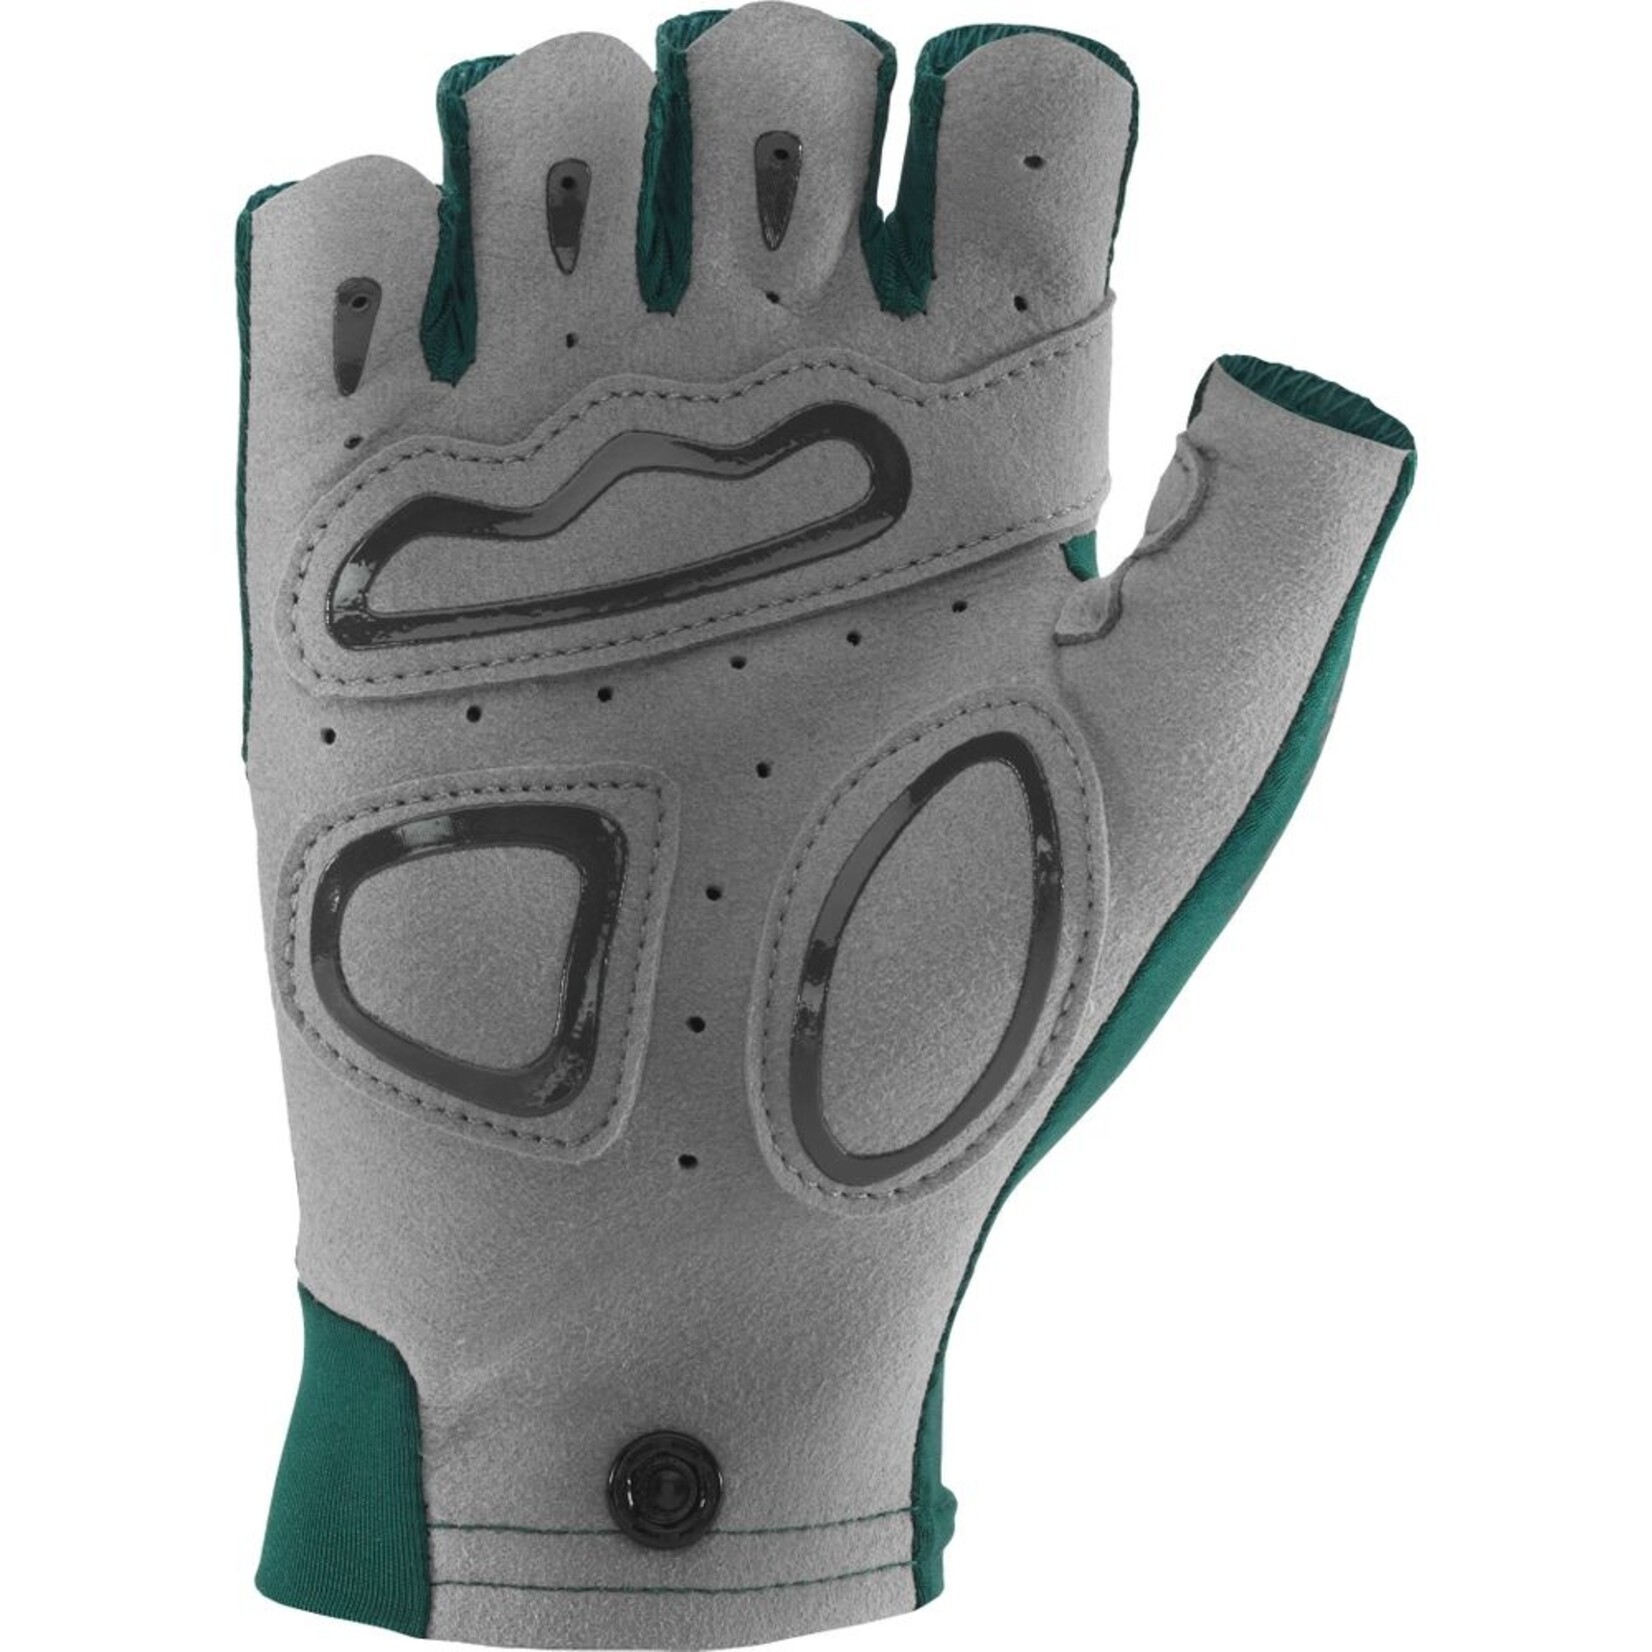 NRS, Inc NRS Women's Boater's Gloves